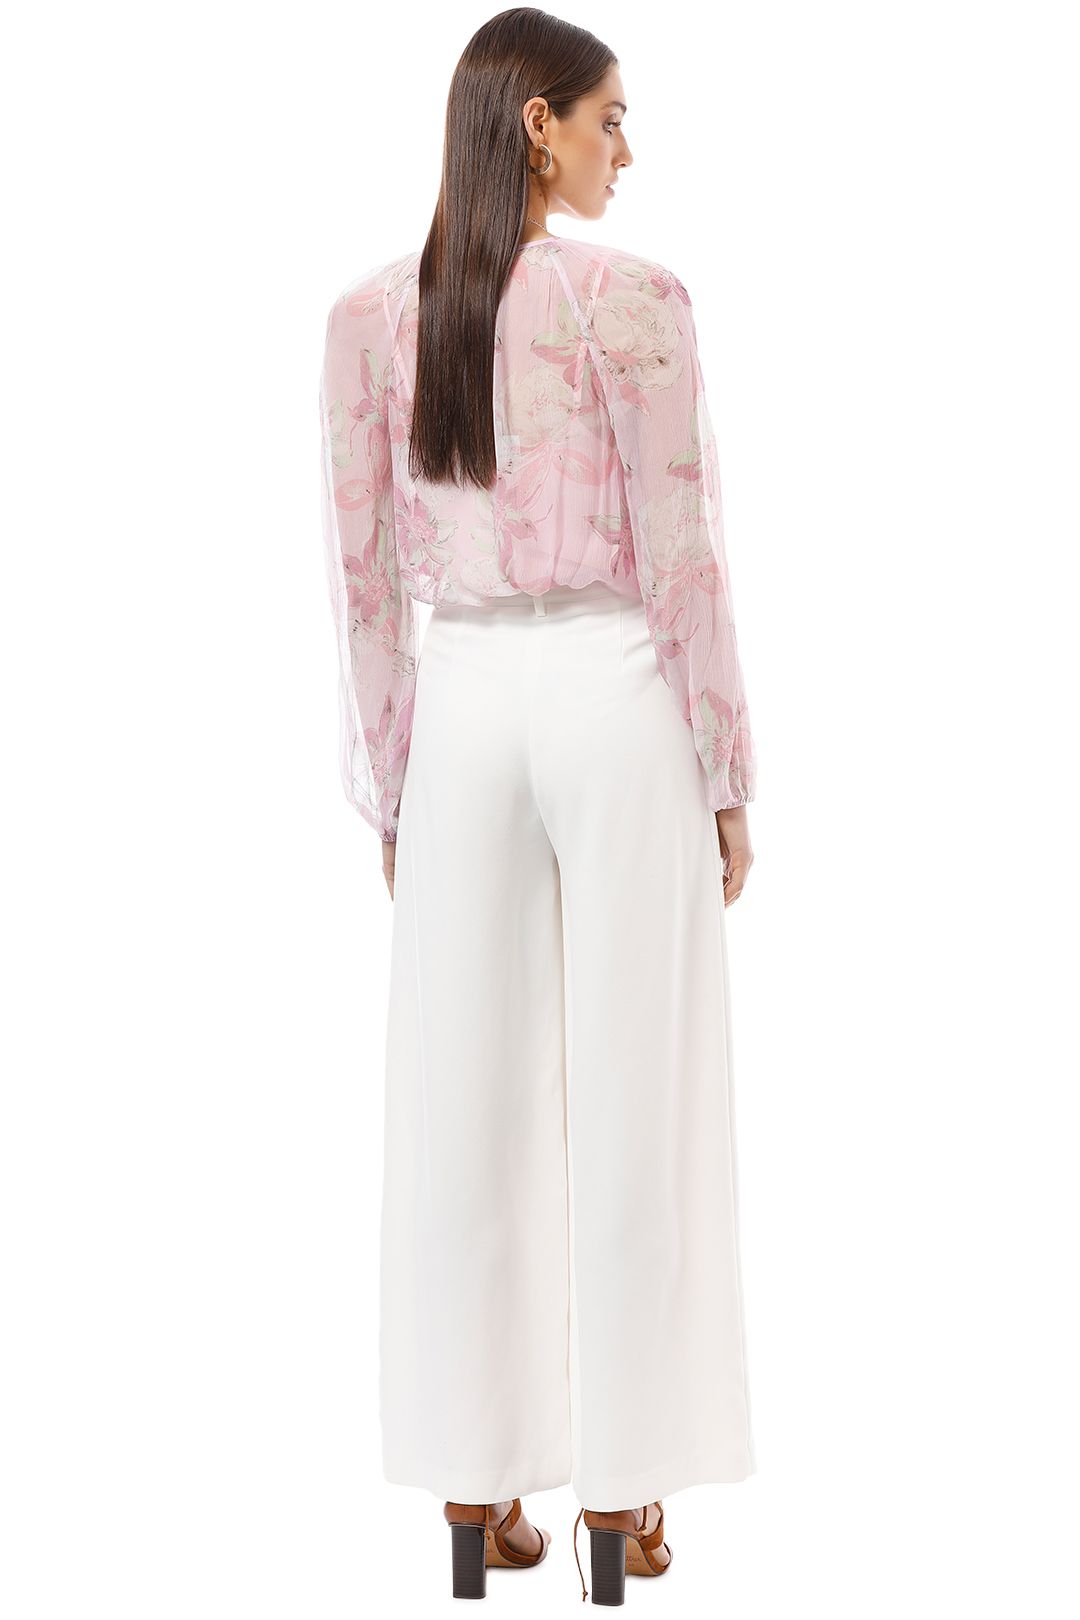 Alice McCall - Watercolour Floral Blouse - Pink Print - Back